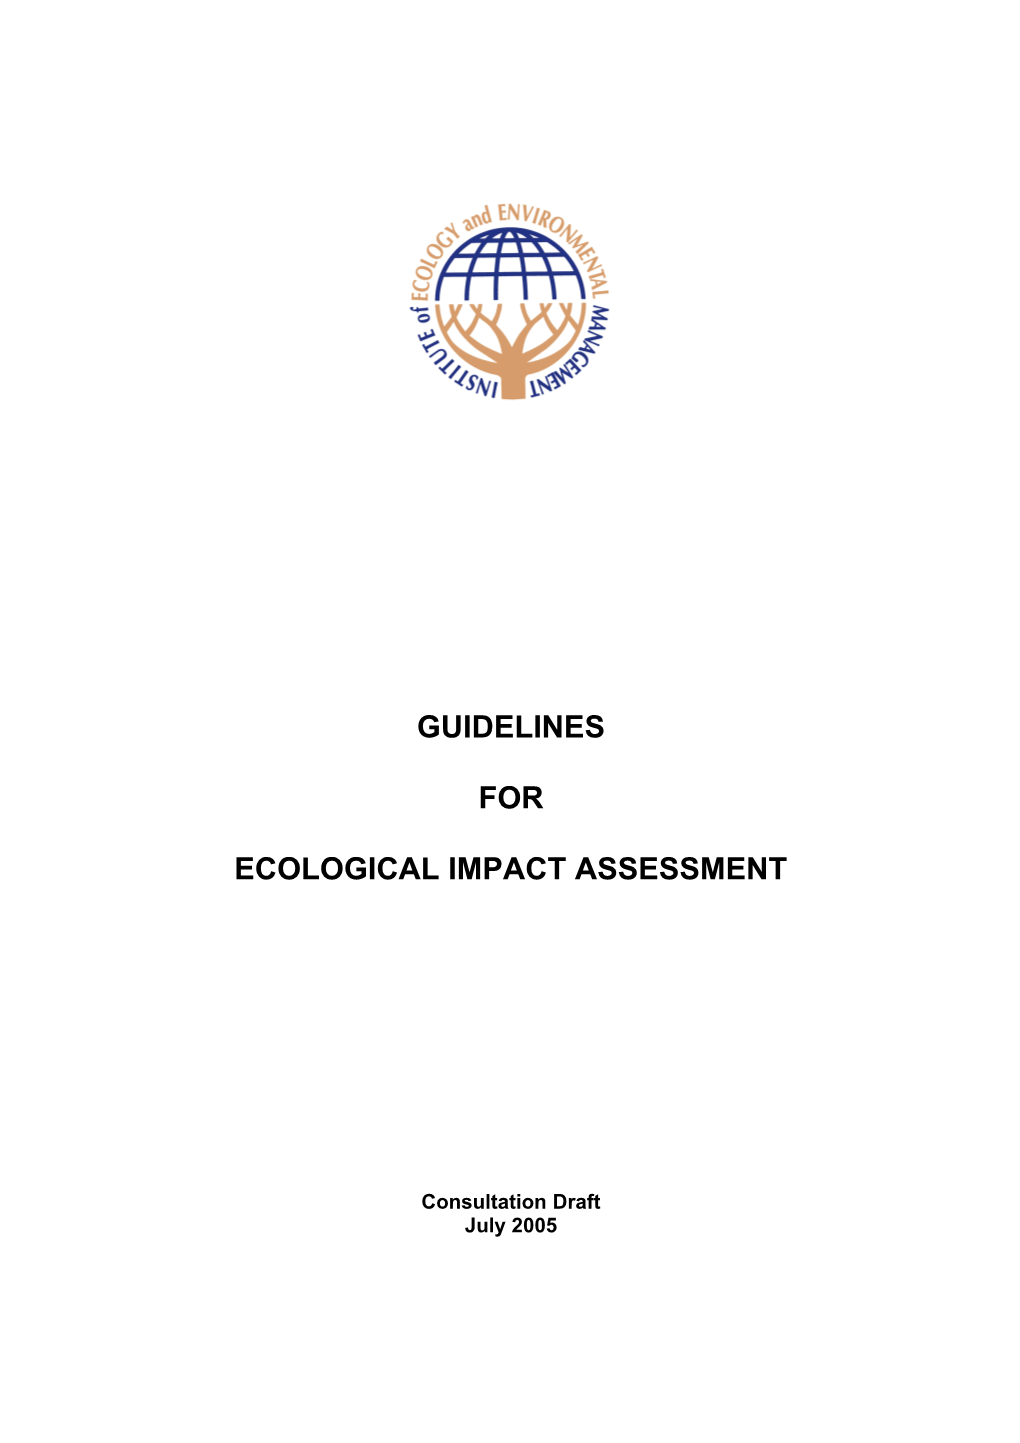 Guidelines for Ecological Impact Assessment